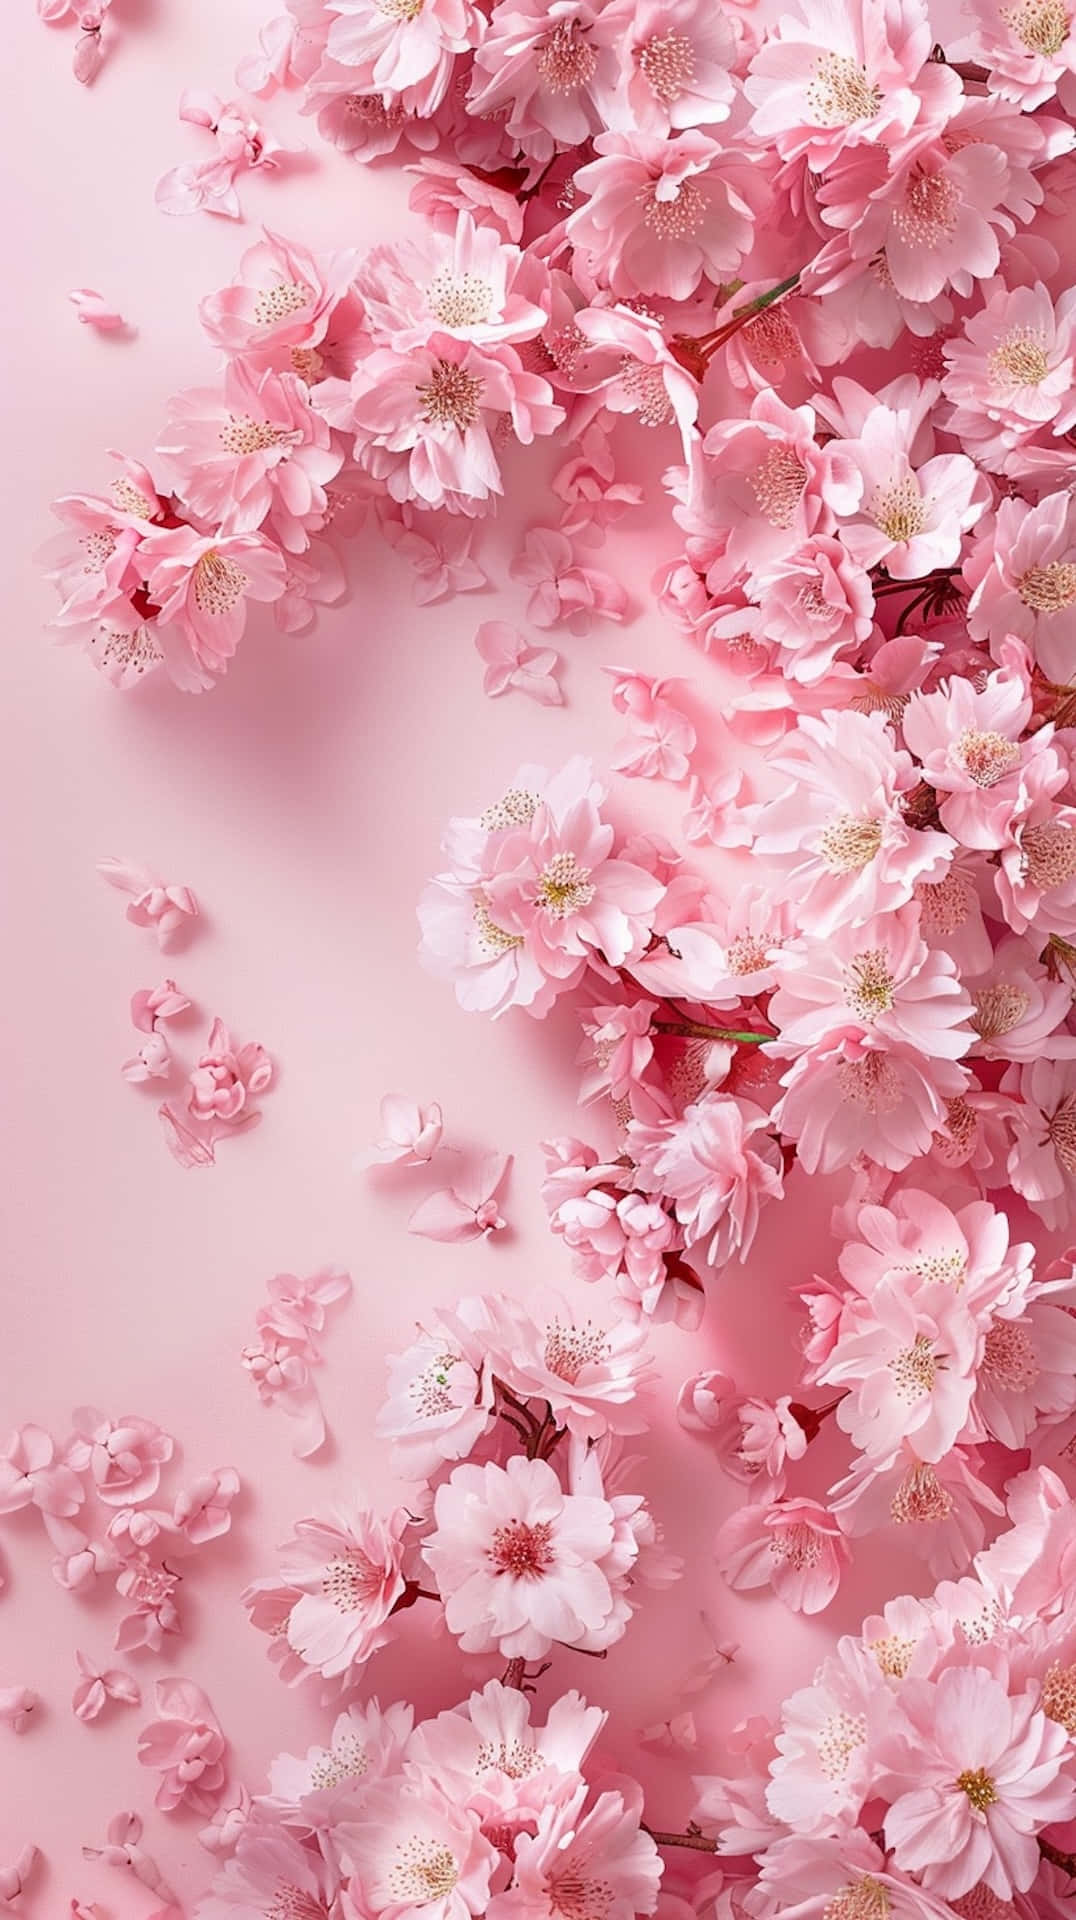 Pink Cherry Blossoms Background Wallpaper